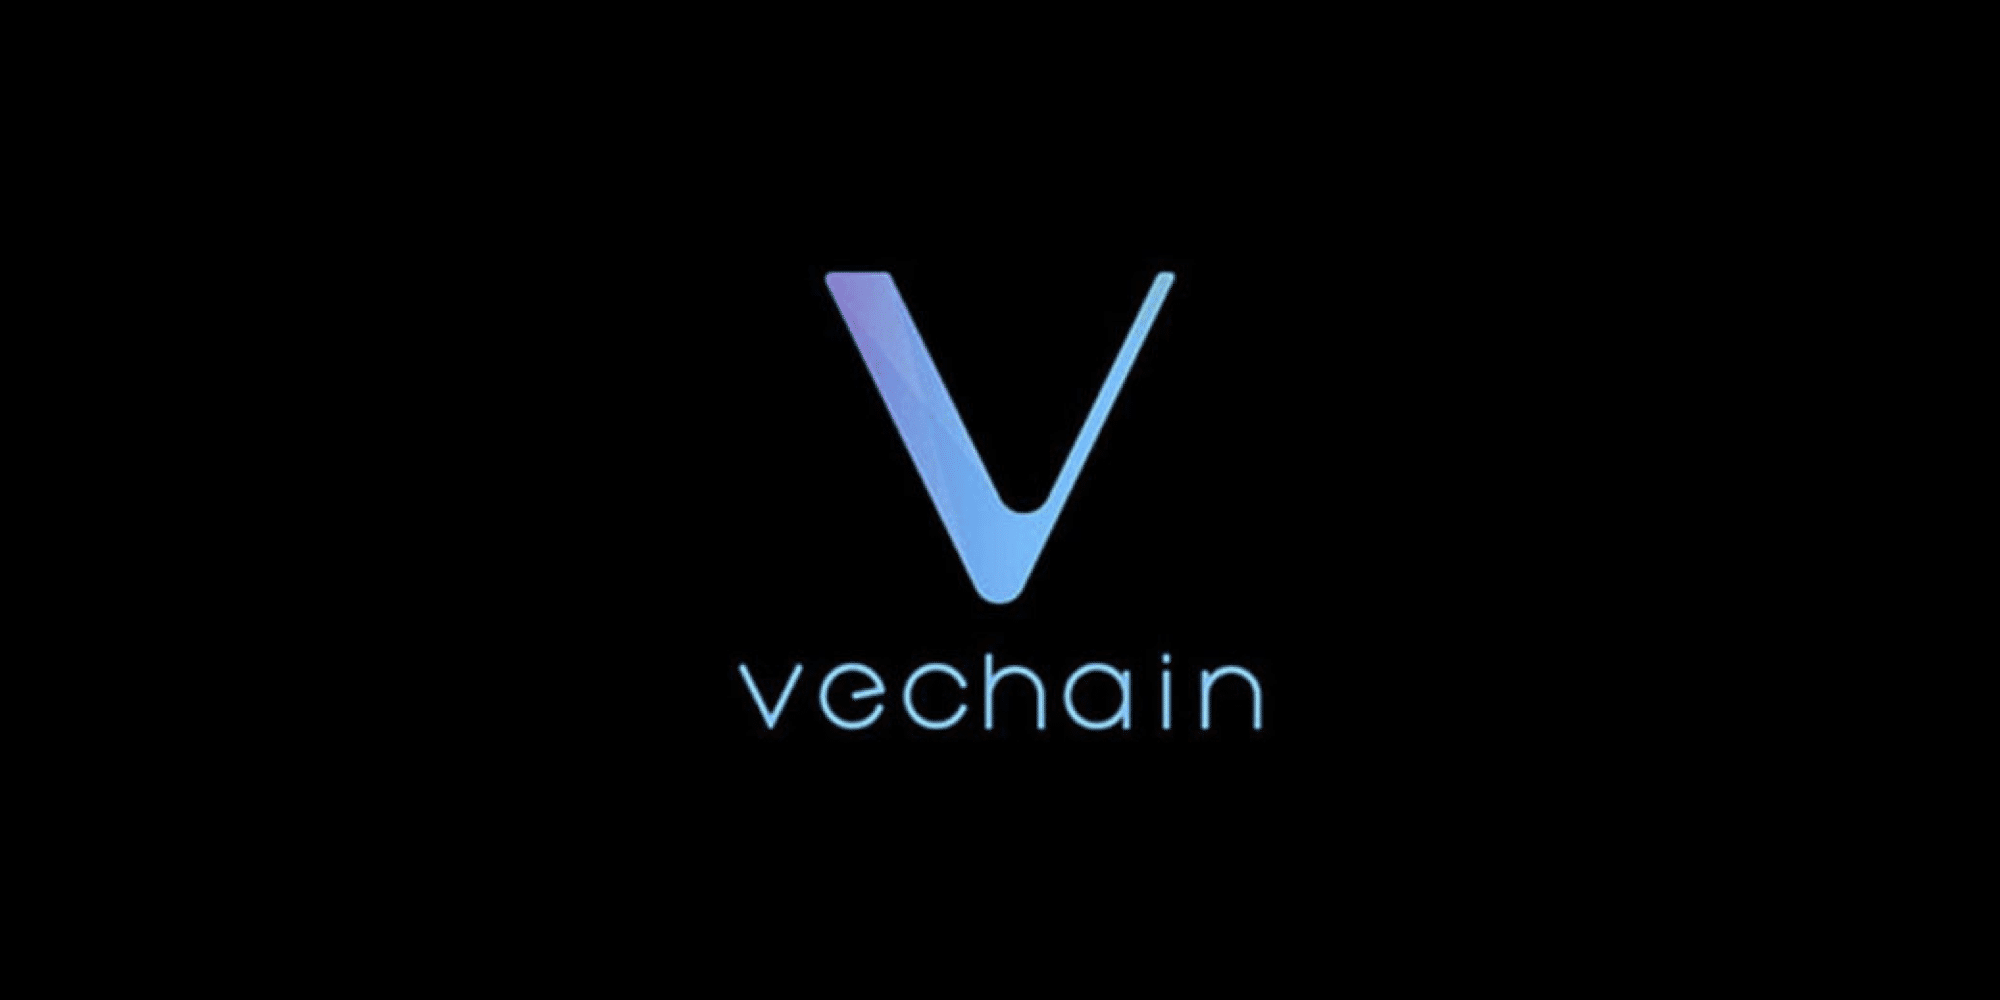 Green Initiative By VeChain Gains Traction Amidst Bullish Expectations